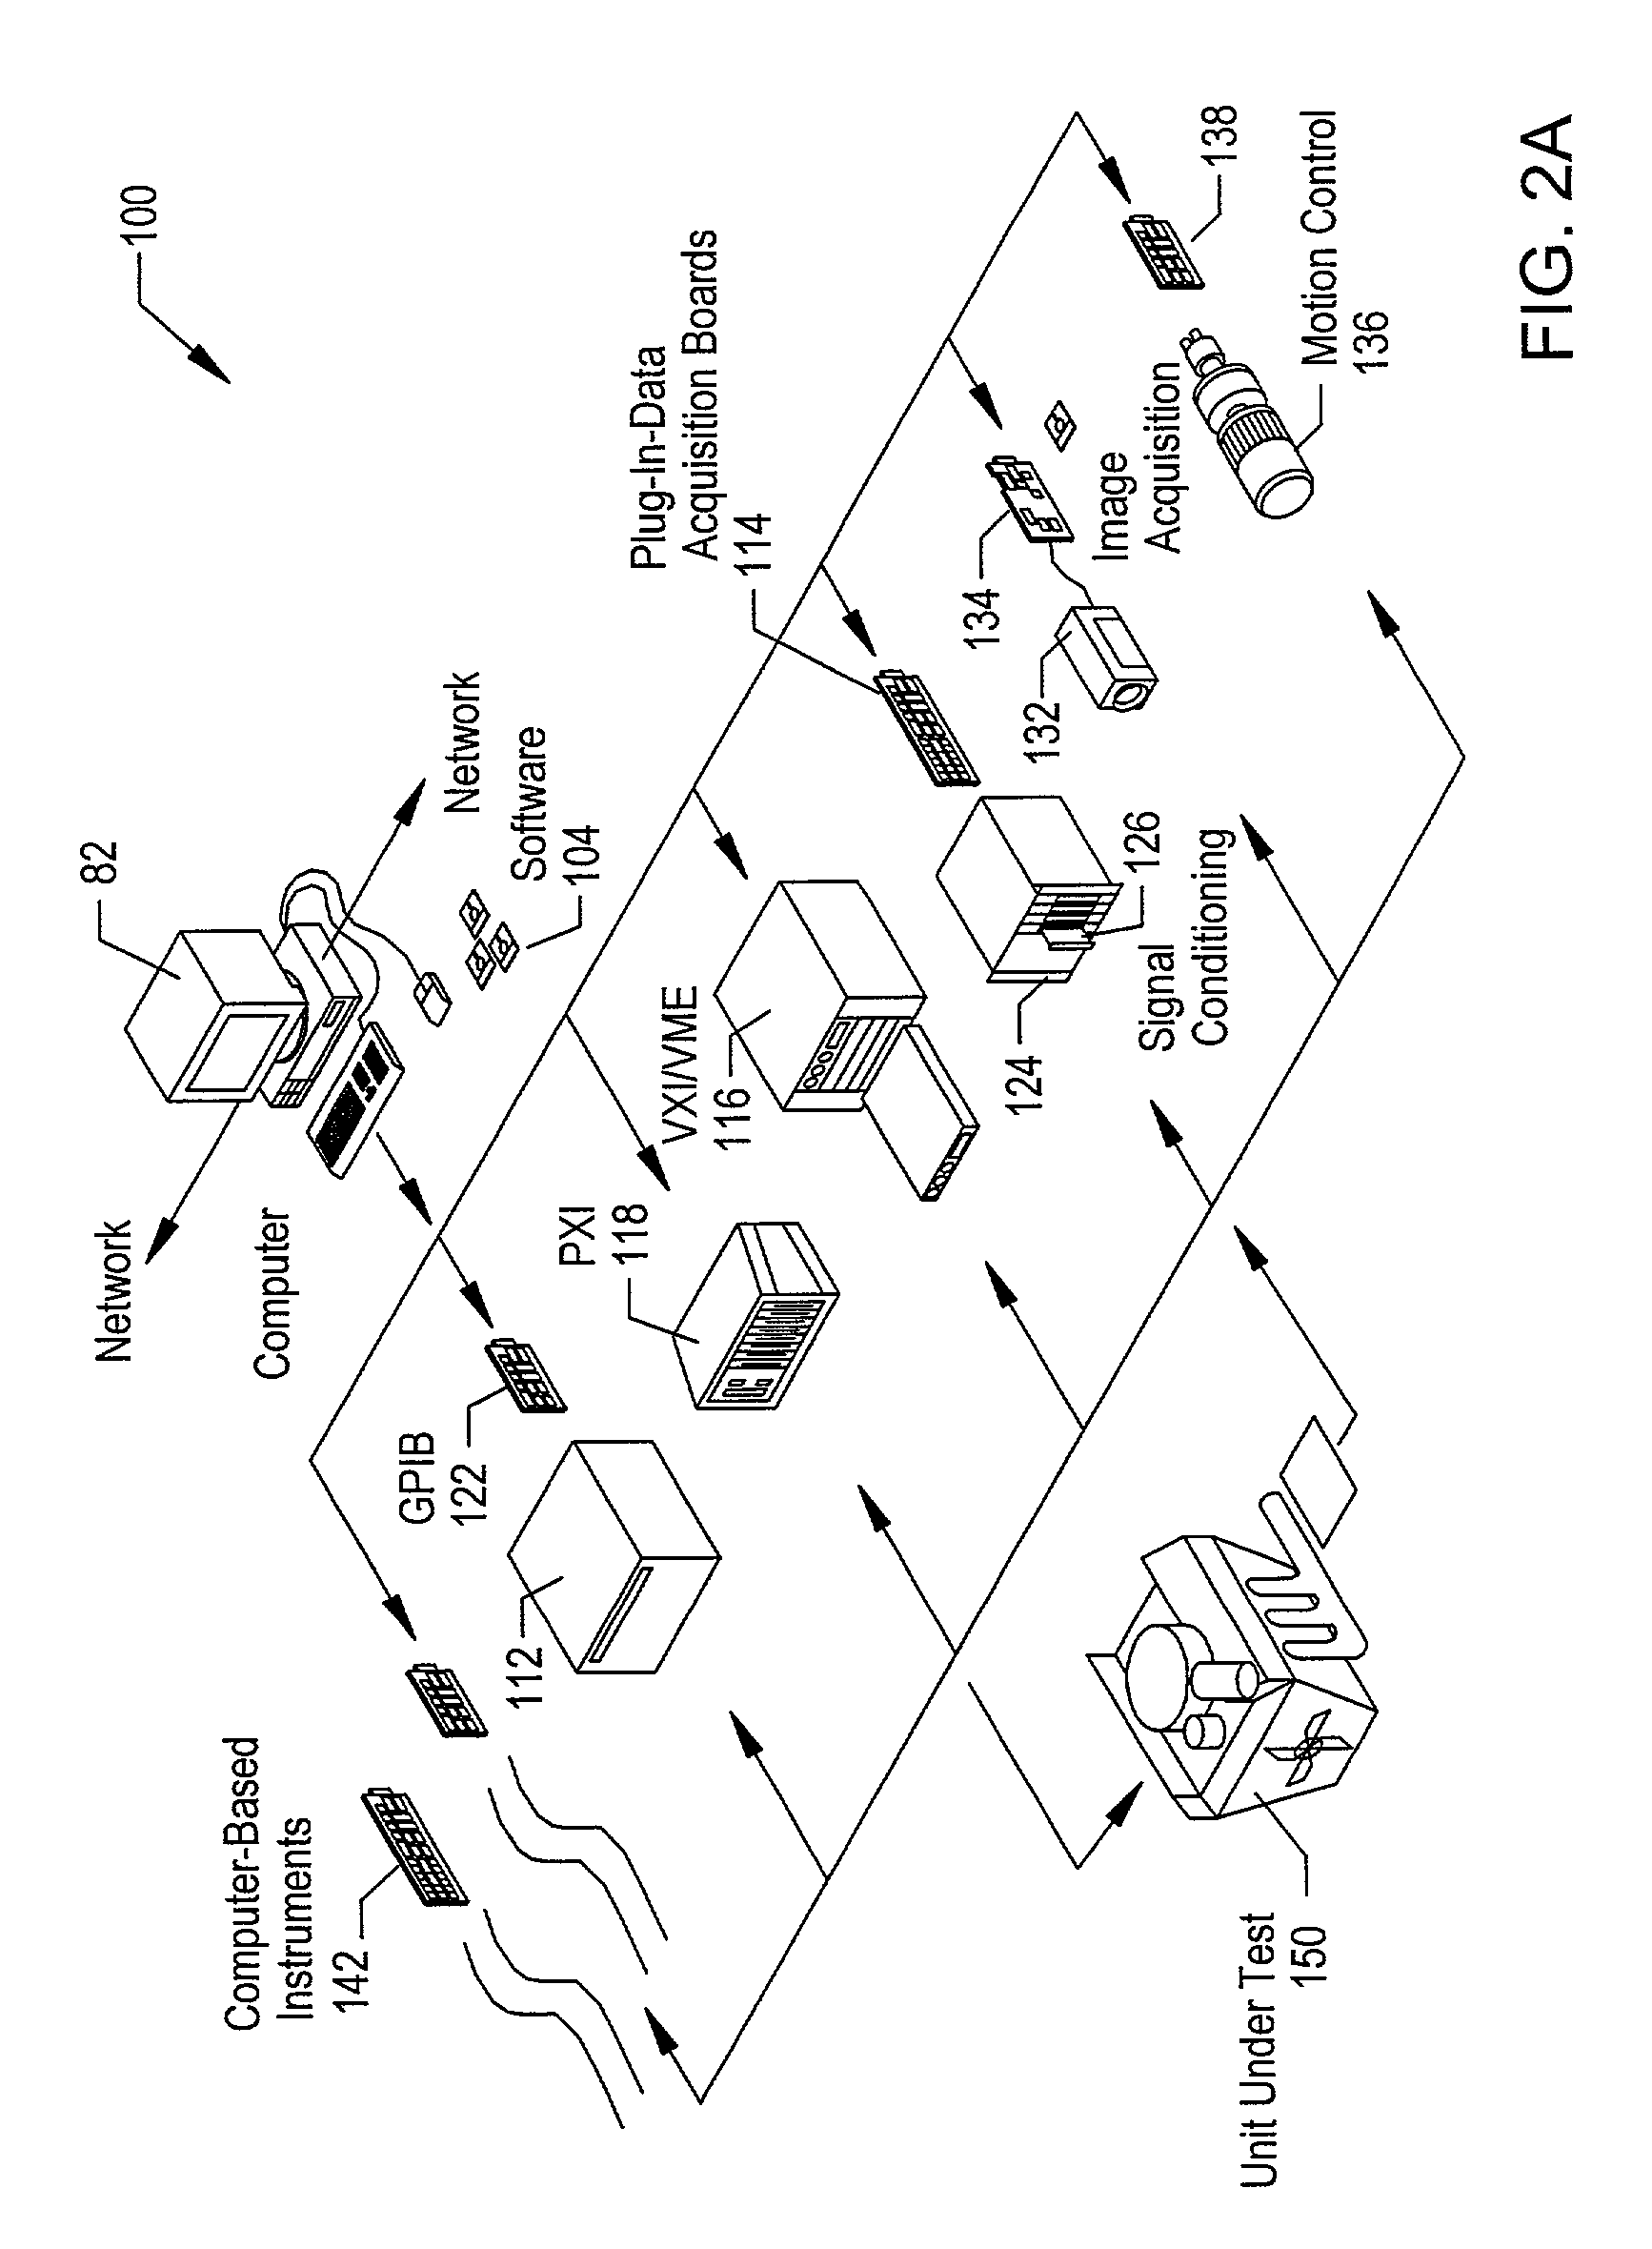 System and method for graphically creating a sequence of motion control, machine vision, and data acquisition (DAQ) operations